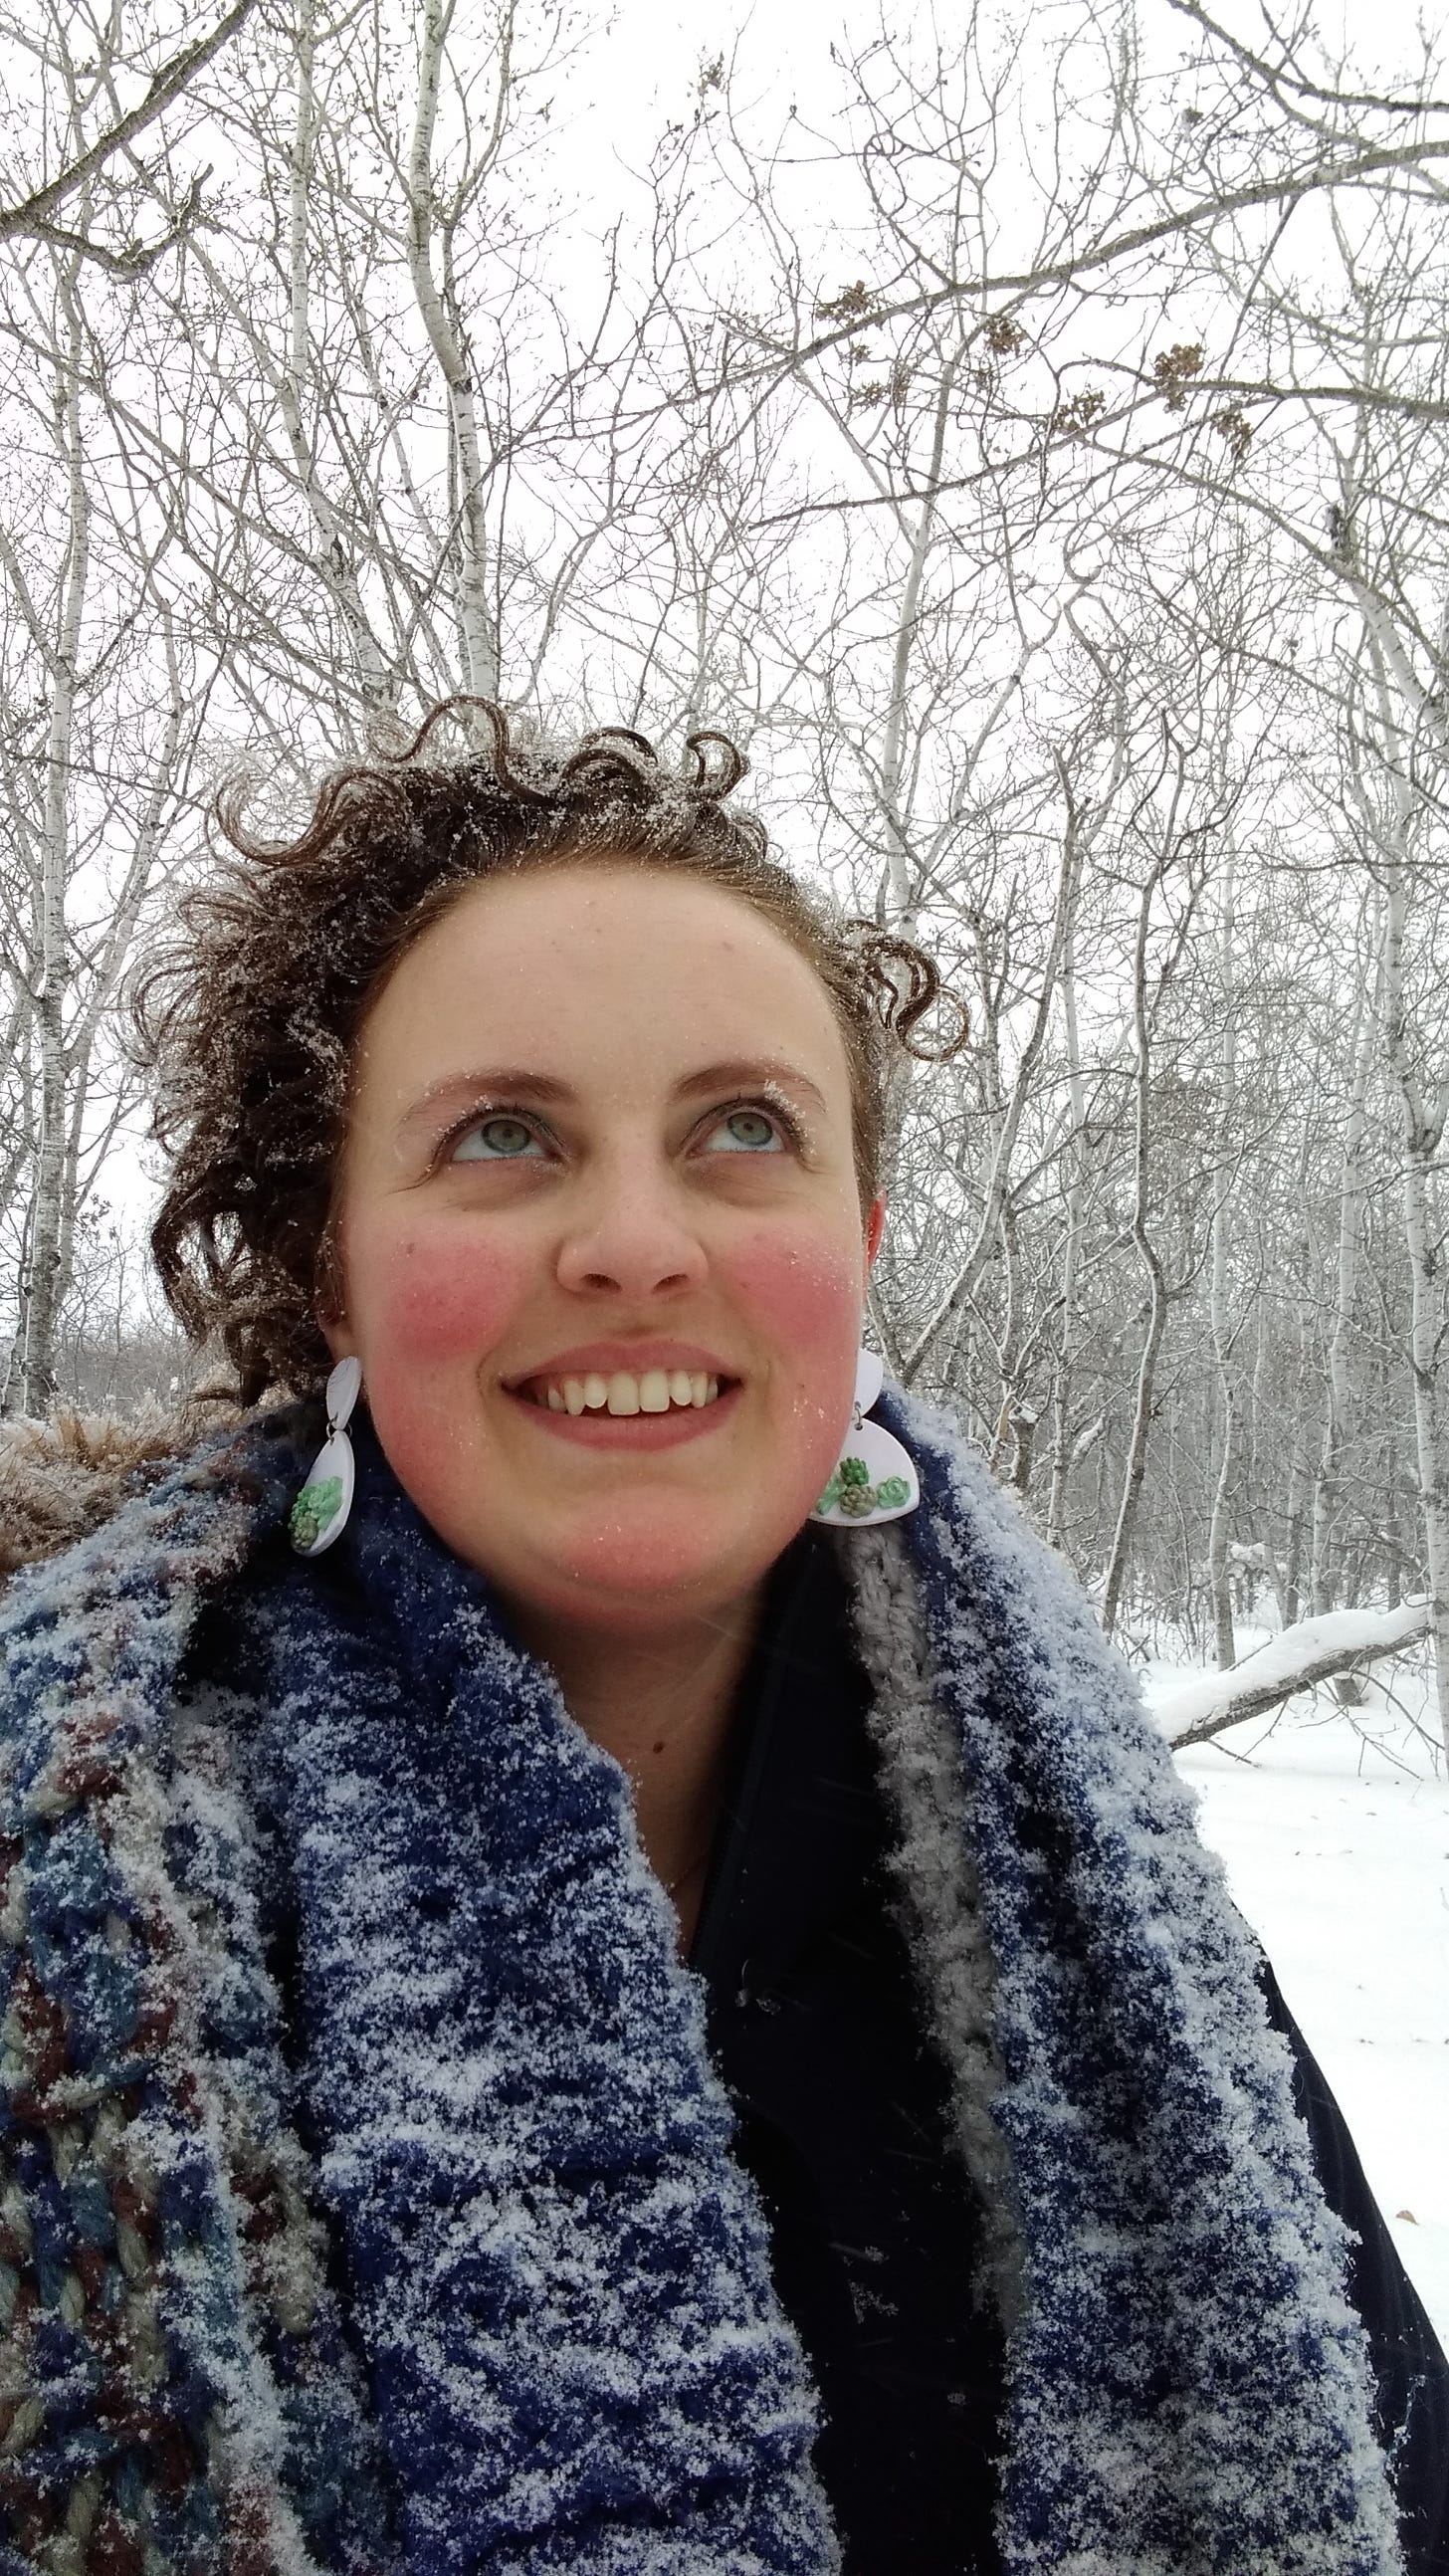 Alyssa smiling in a snowy forest